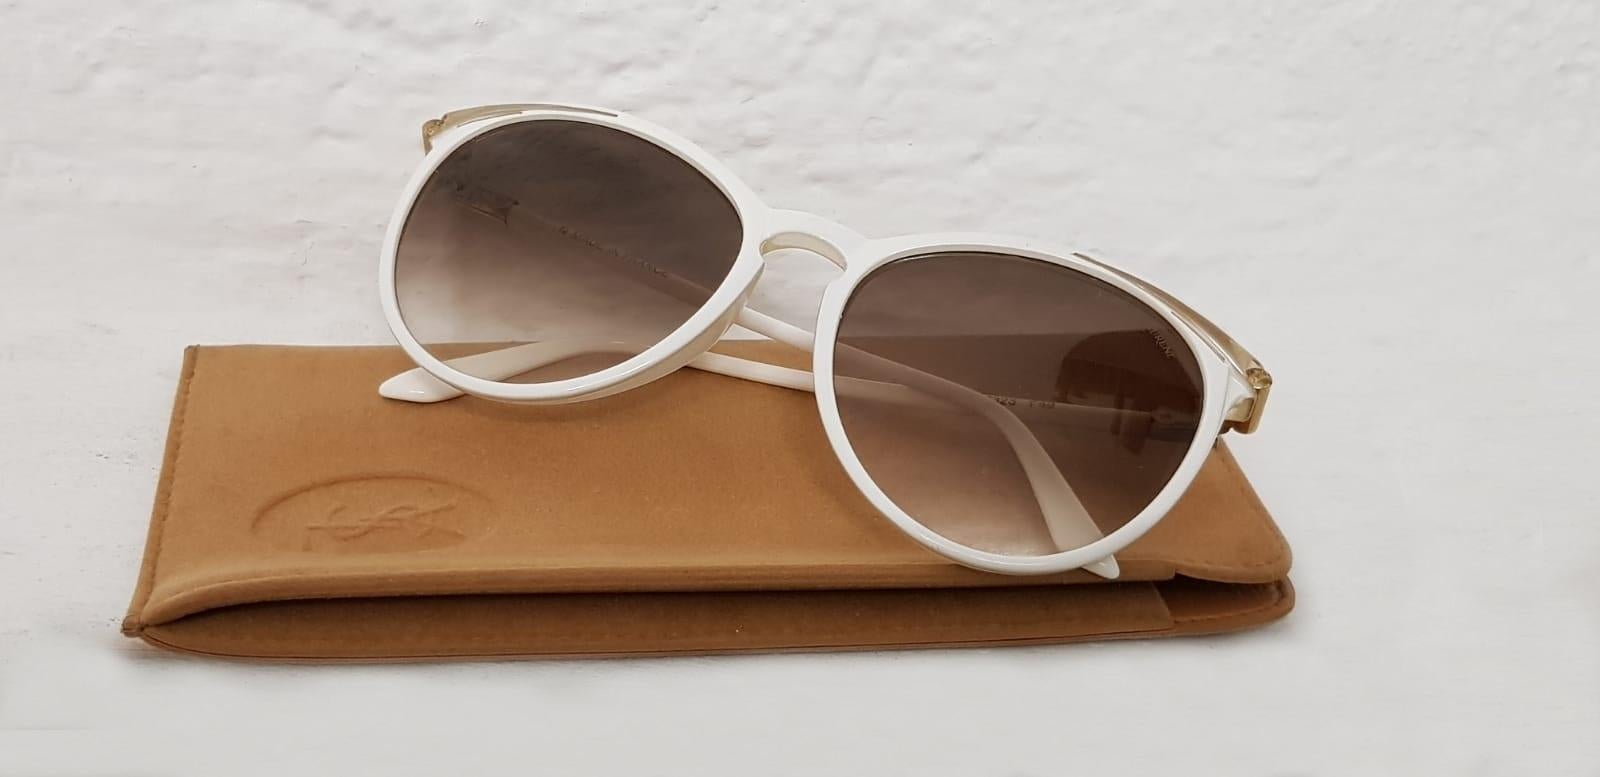 Yves Saint Laurent 8323 Sunglasses, 1980s  In New Condition For Sale In Madrid, Spain